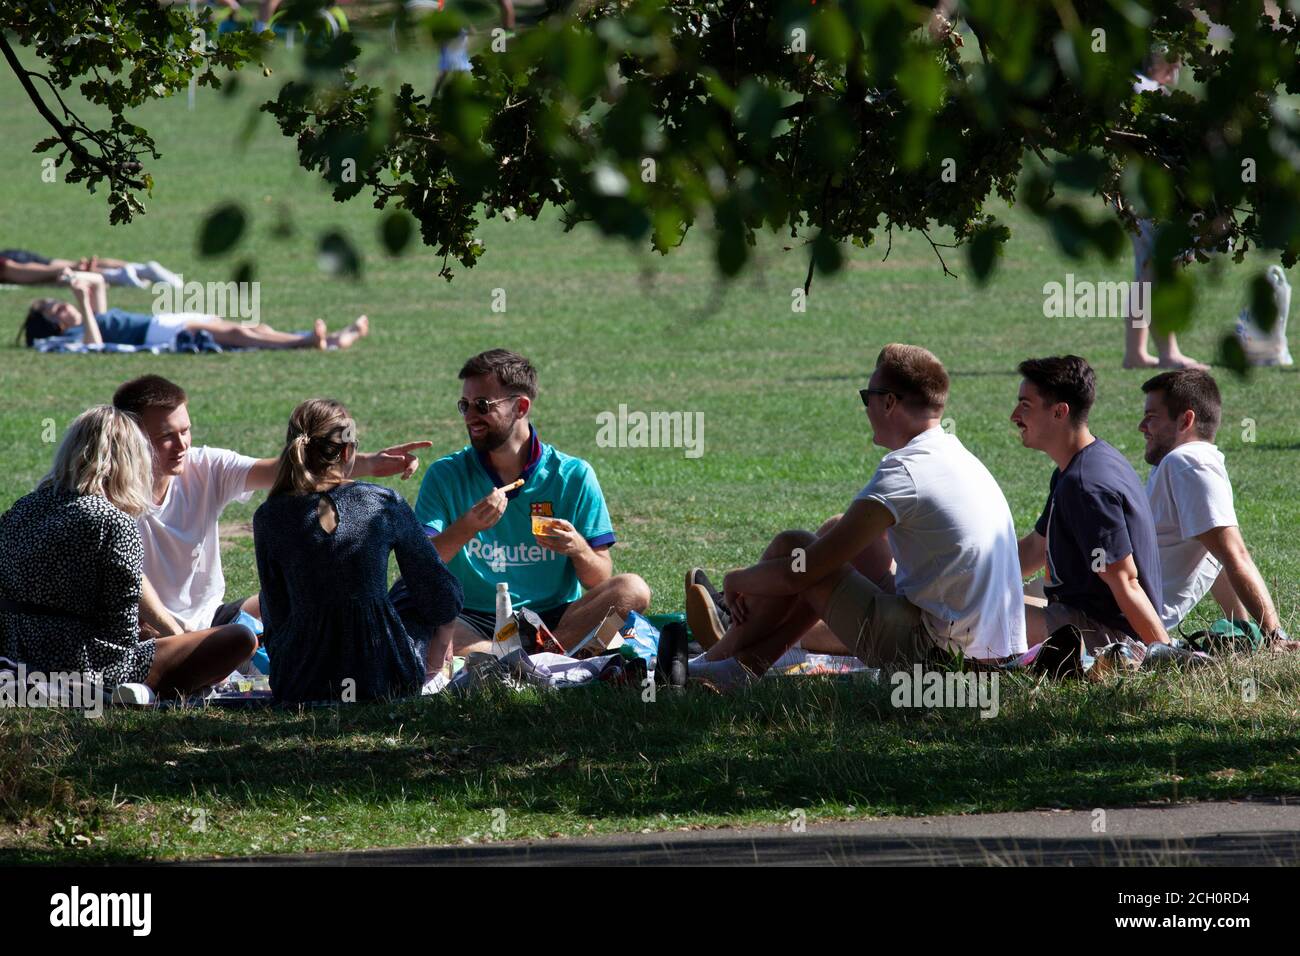 London, UK. 13 Sept 2020: Londoners took advantage of sunny weather to picnic and do sports on Clapham Common the day before social distancing rules will change. Anna Watson/Alamy Live news Stock Photo